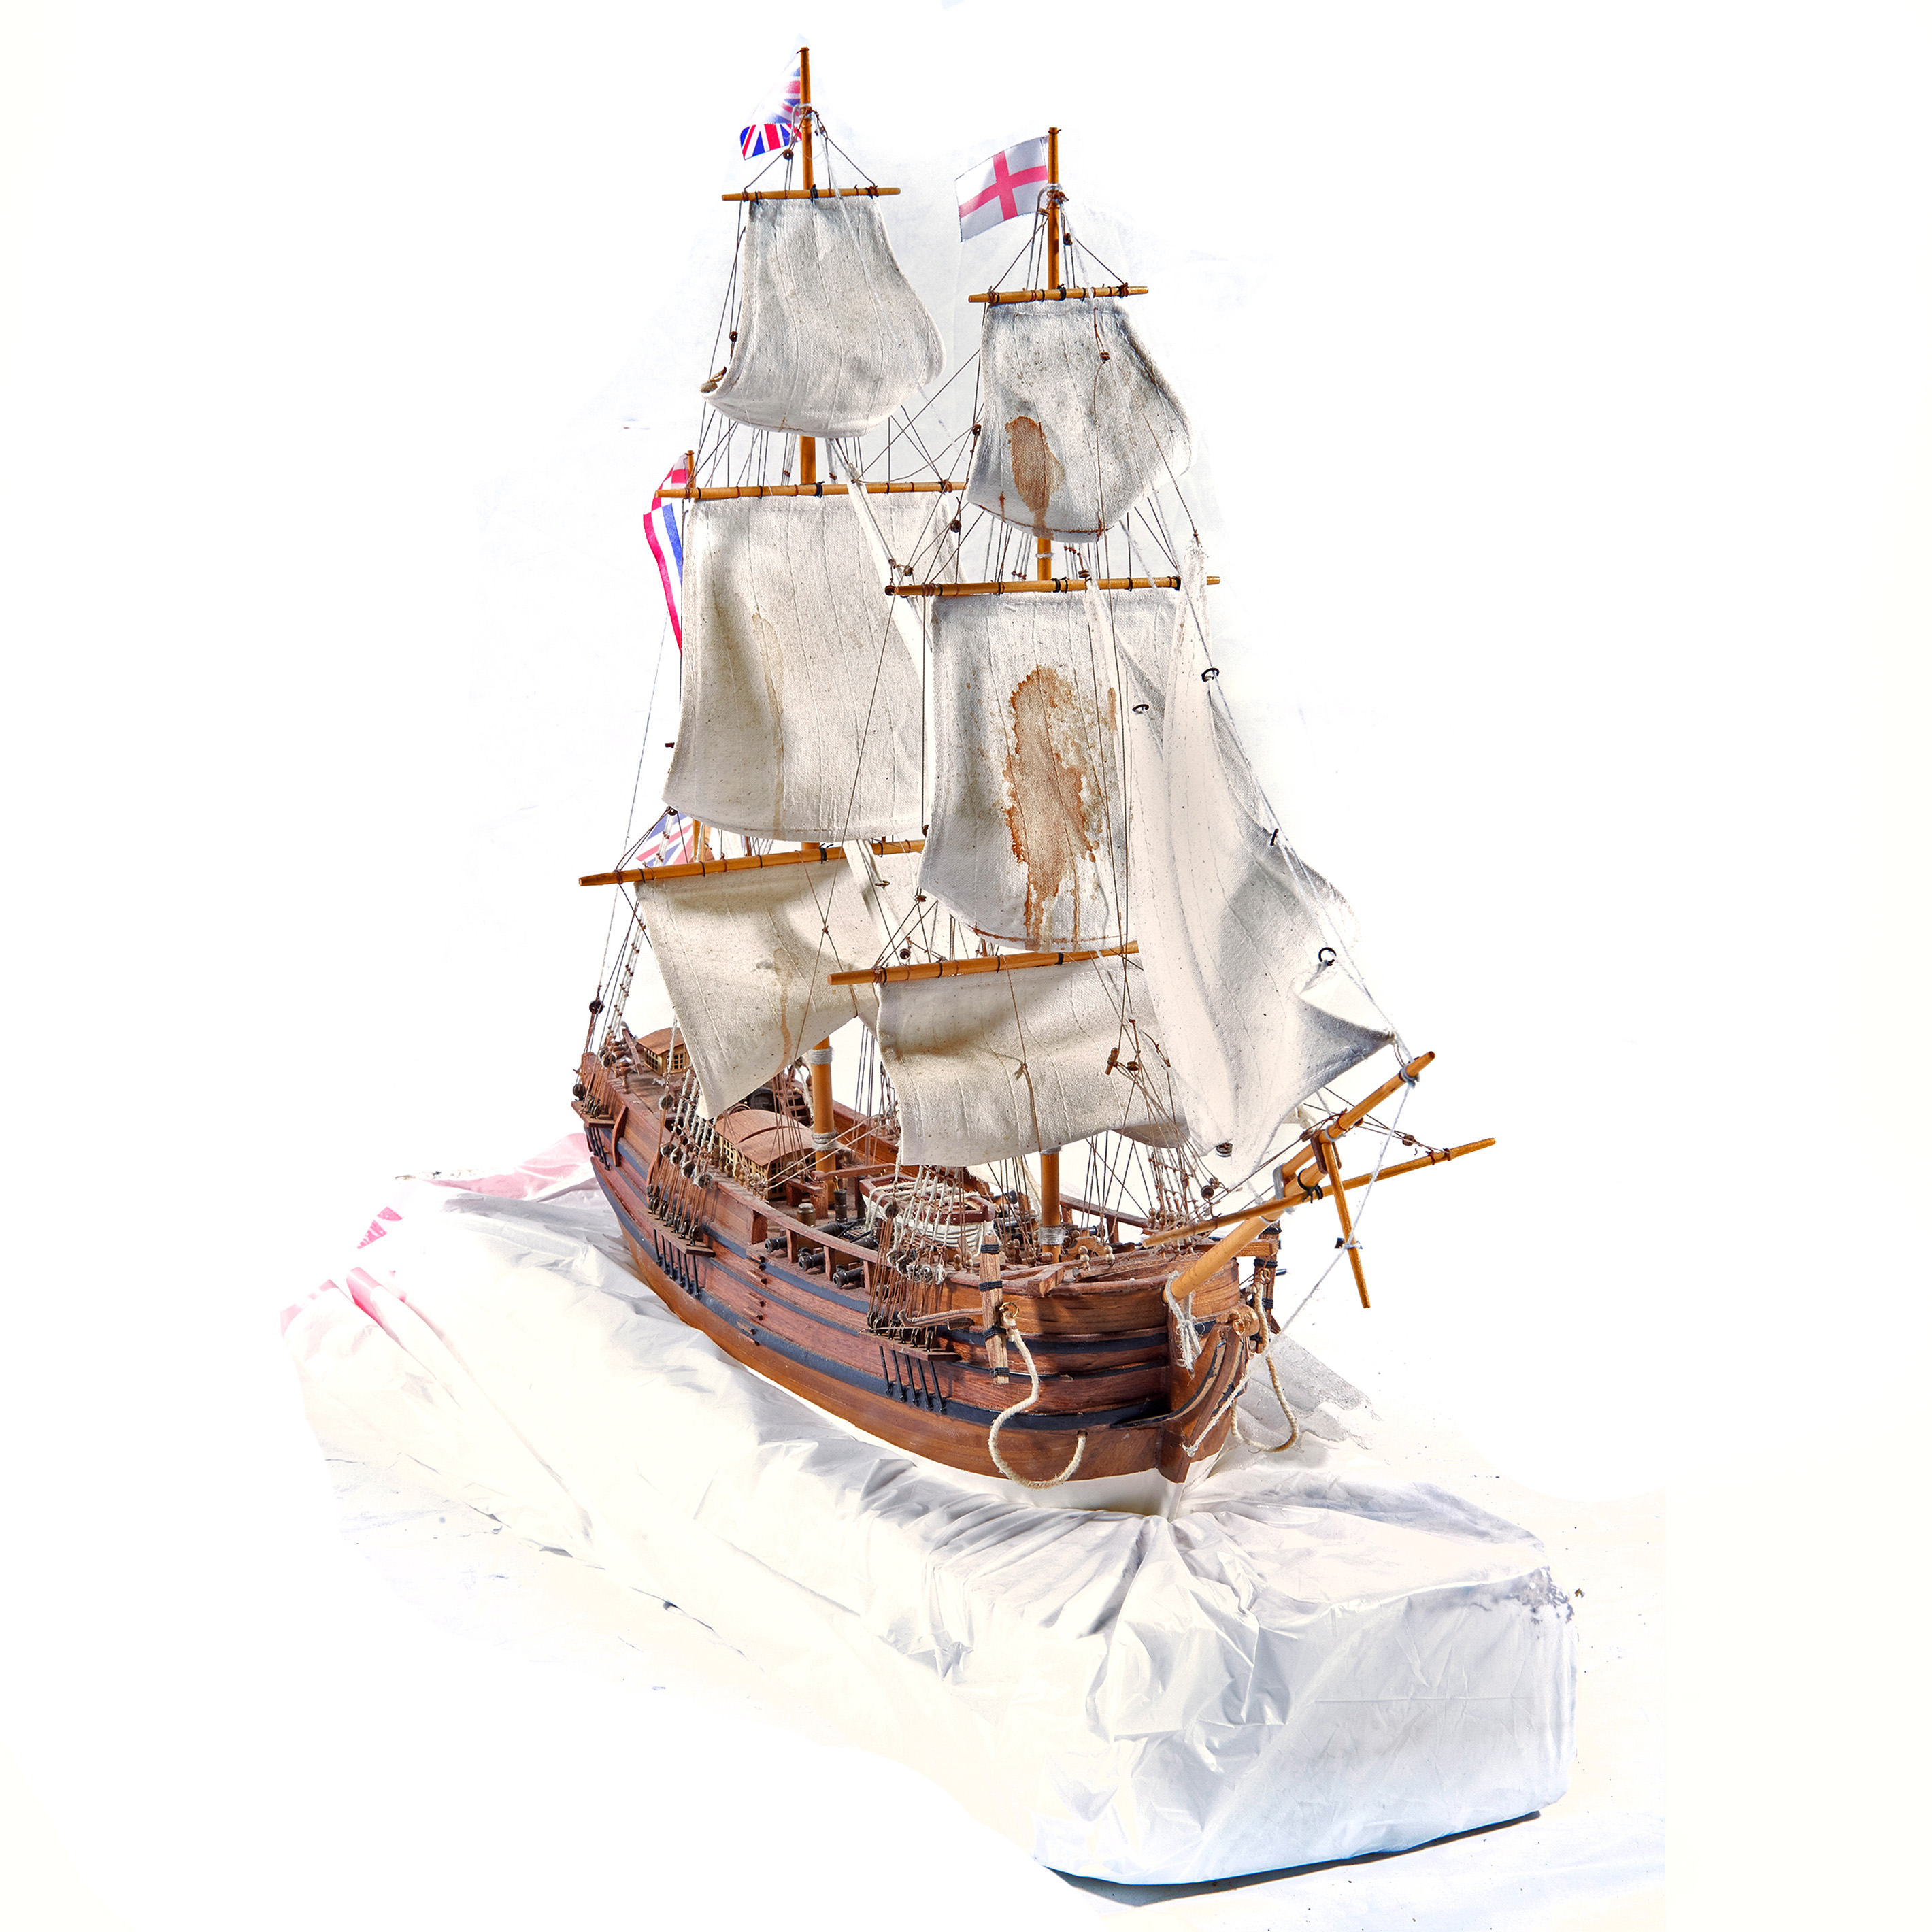 A HAND BUILT SCALE MODEL OF A GALLEON 3a3e57